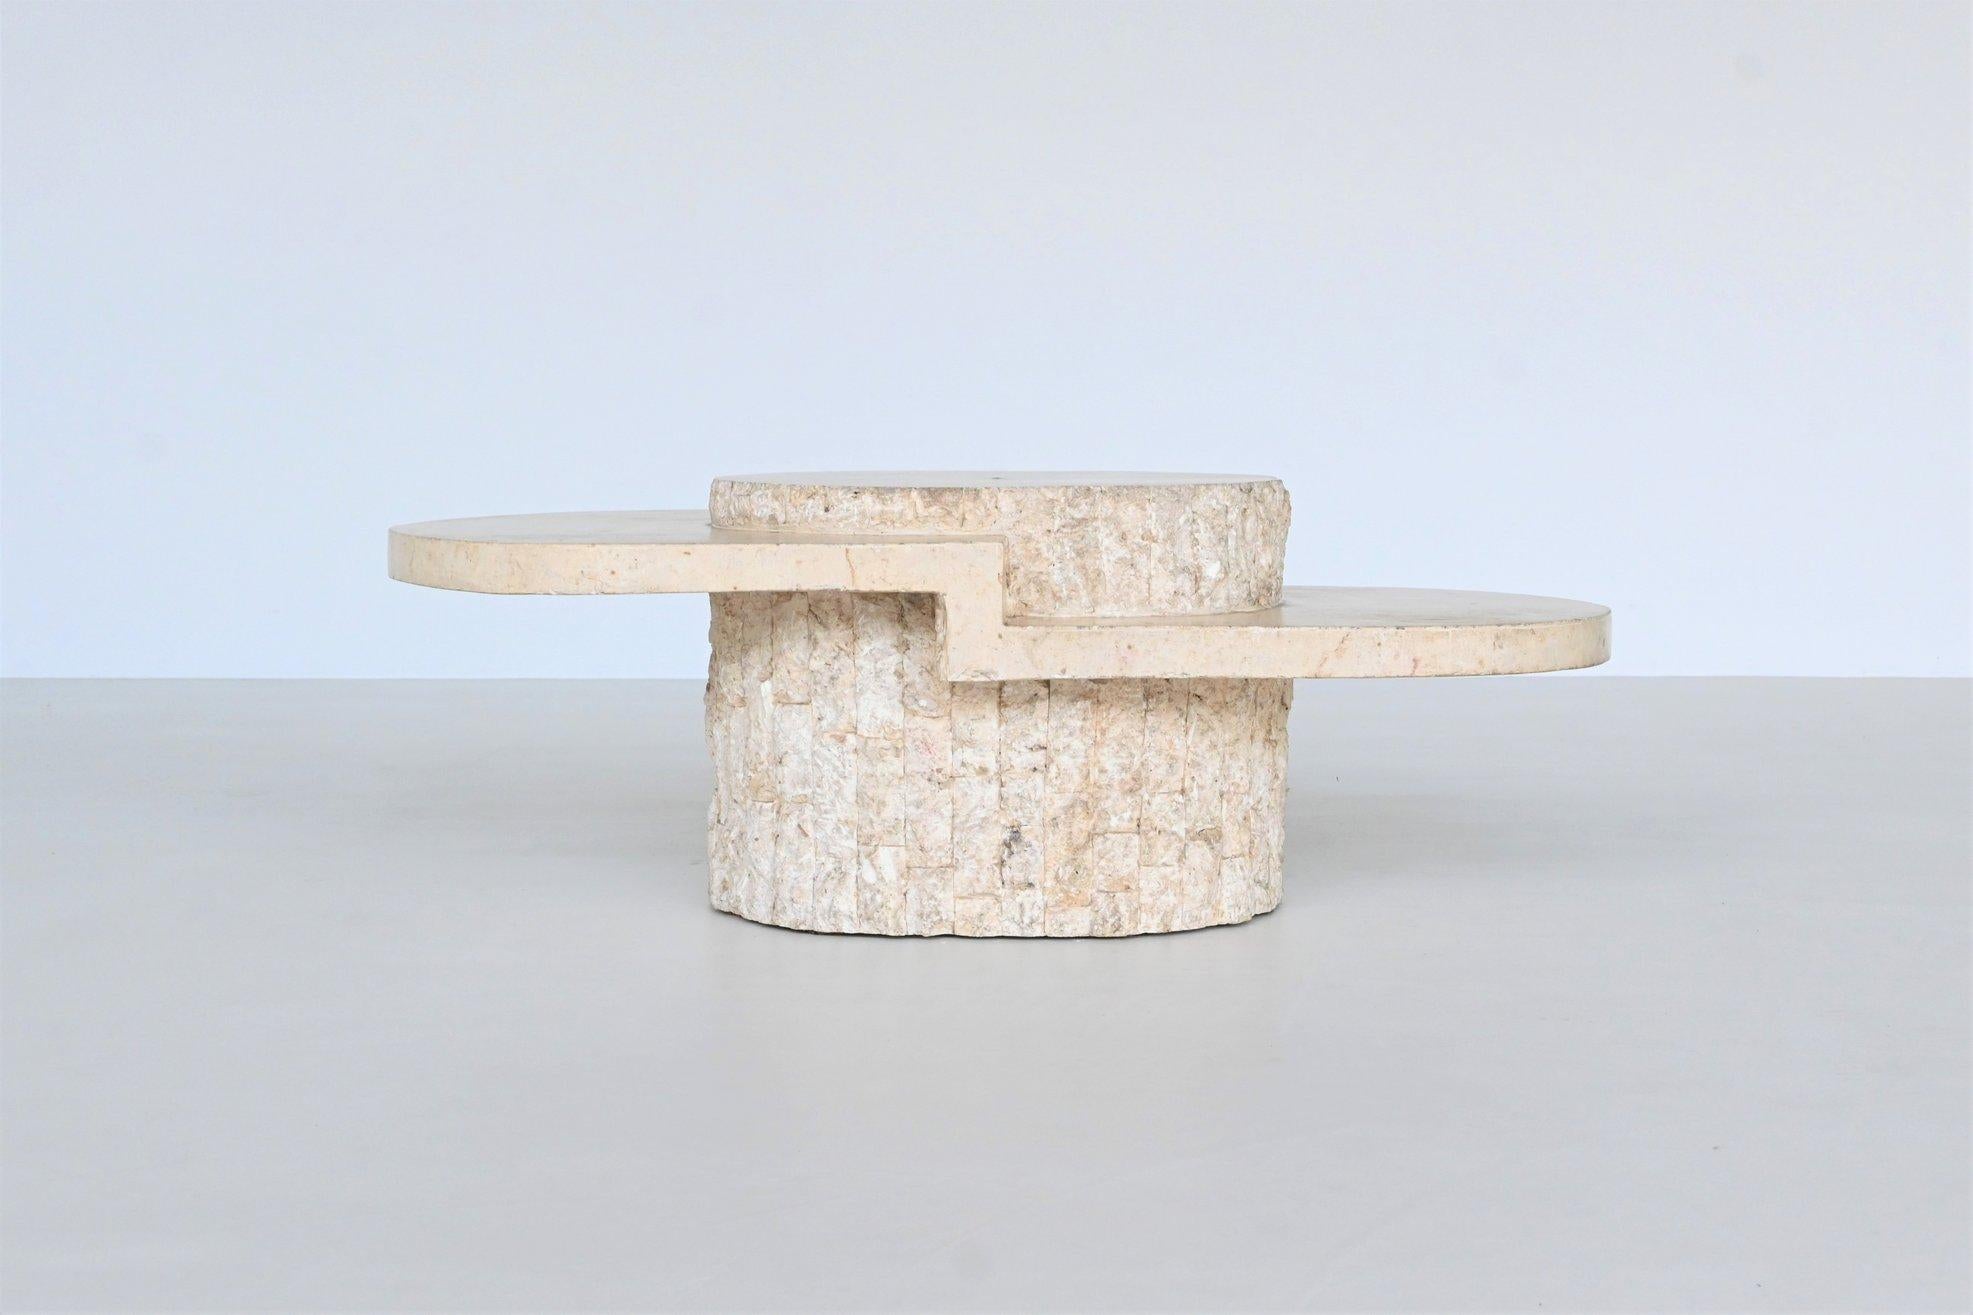 Beautiful sculptural oval coffee table designed and manufactured by Magnussen Ponte, Italy 1970. The top is made of highly polished cream white Mactan stone supported by a signature textured carved stone tile base. This brutalist striking coffee